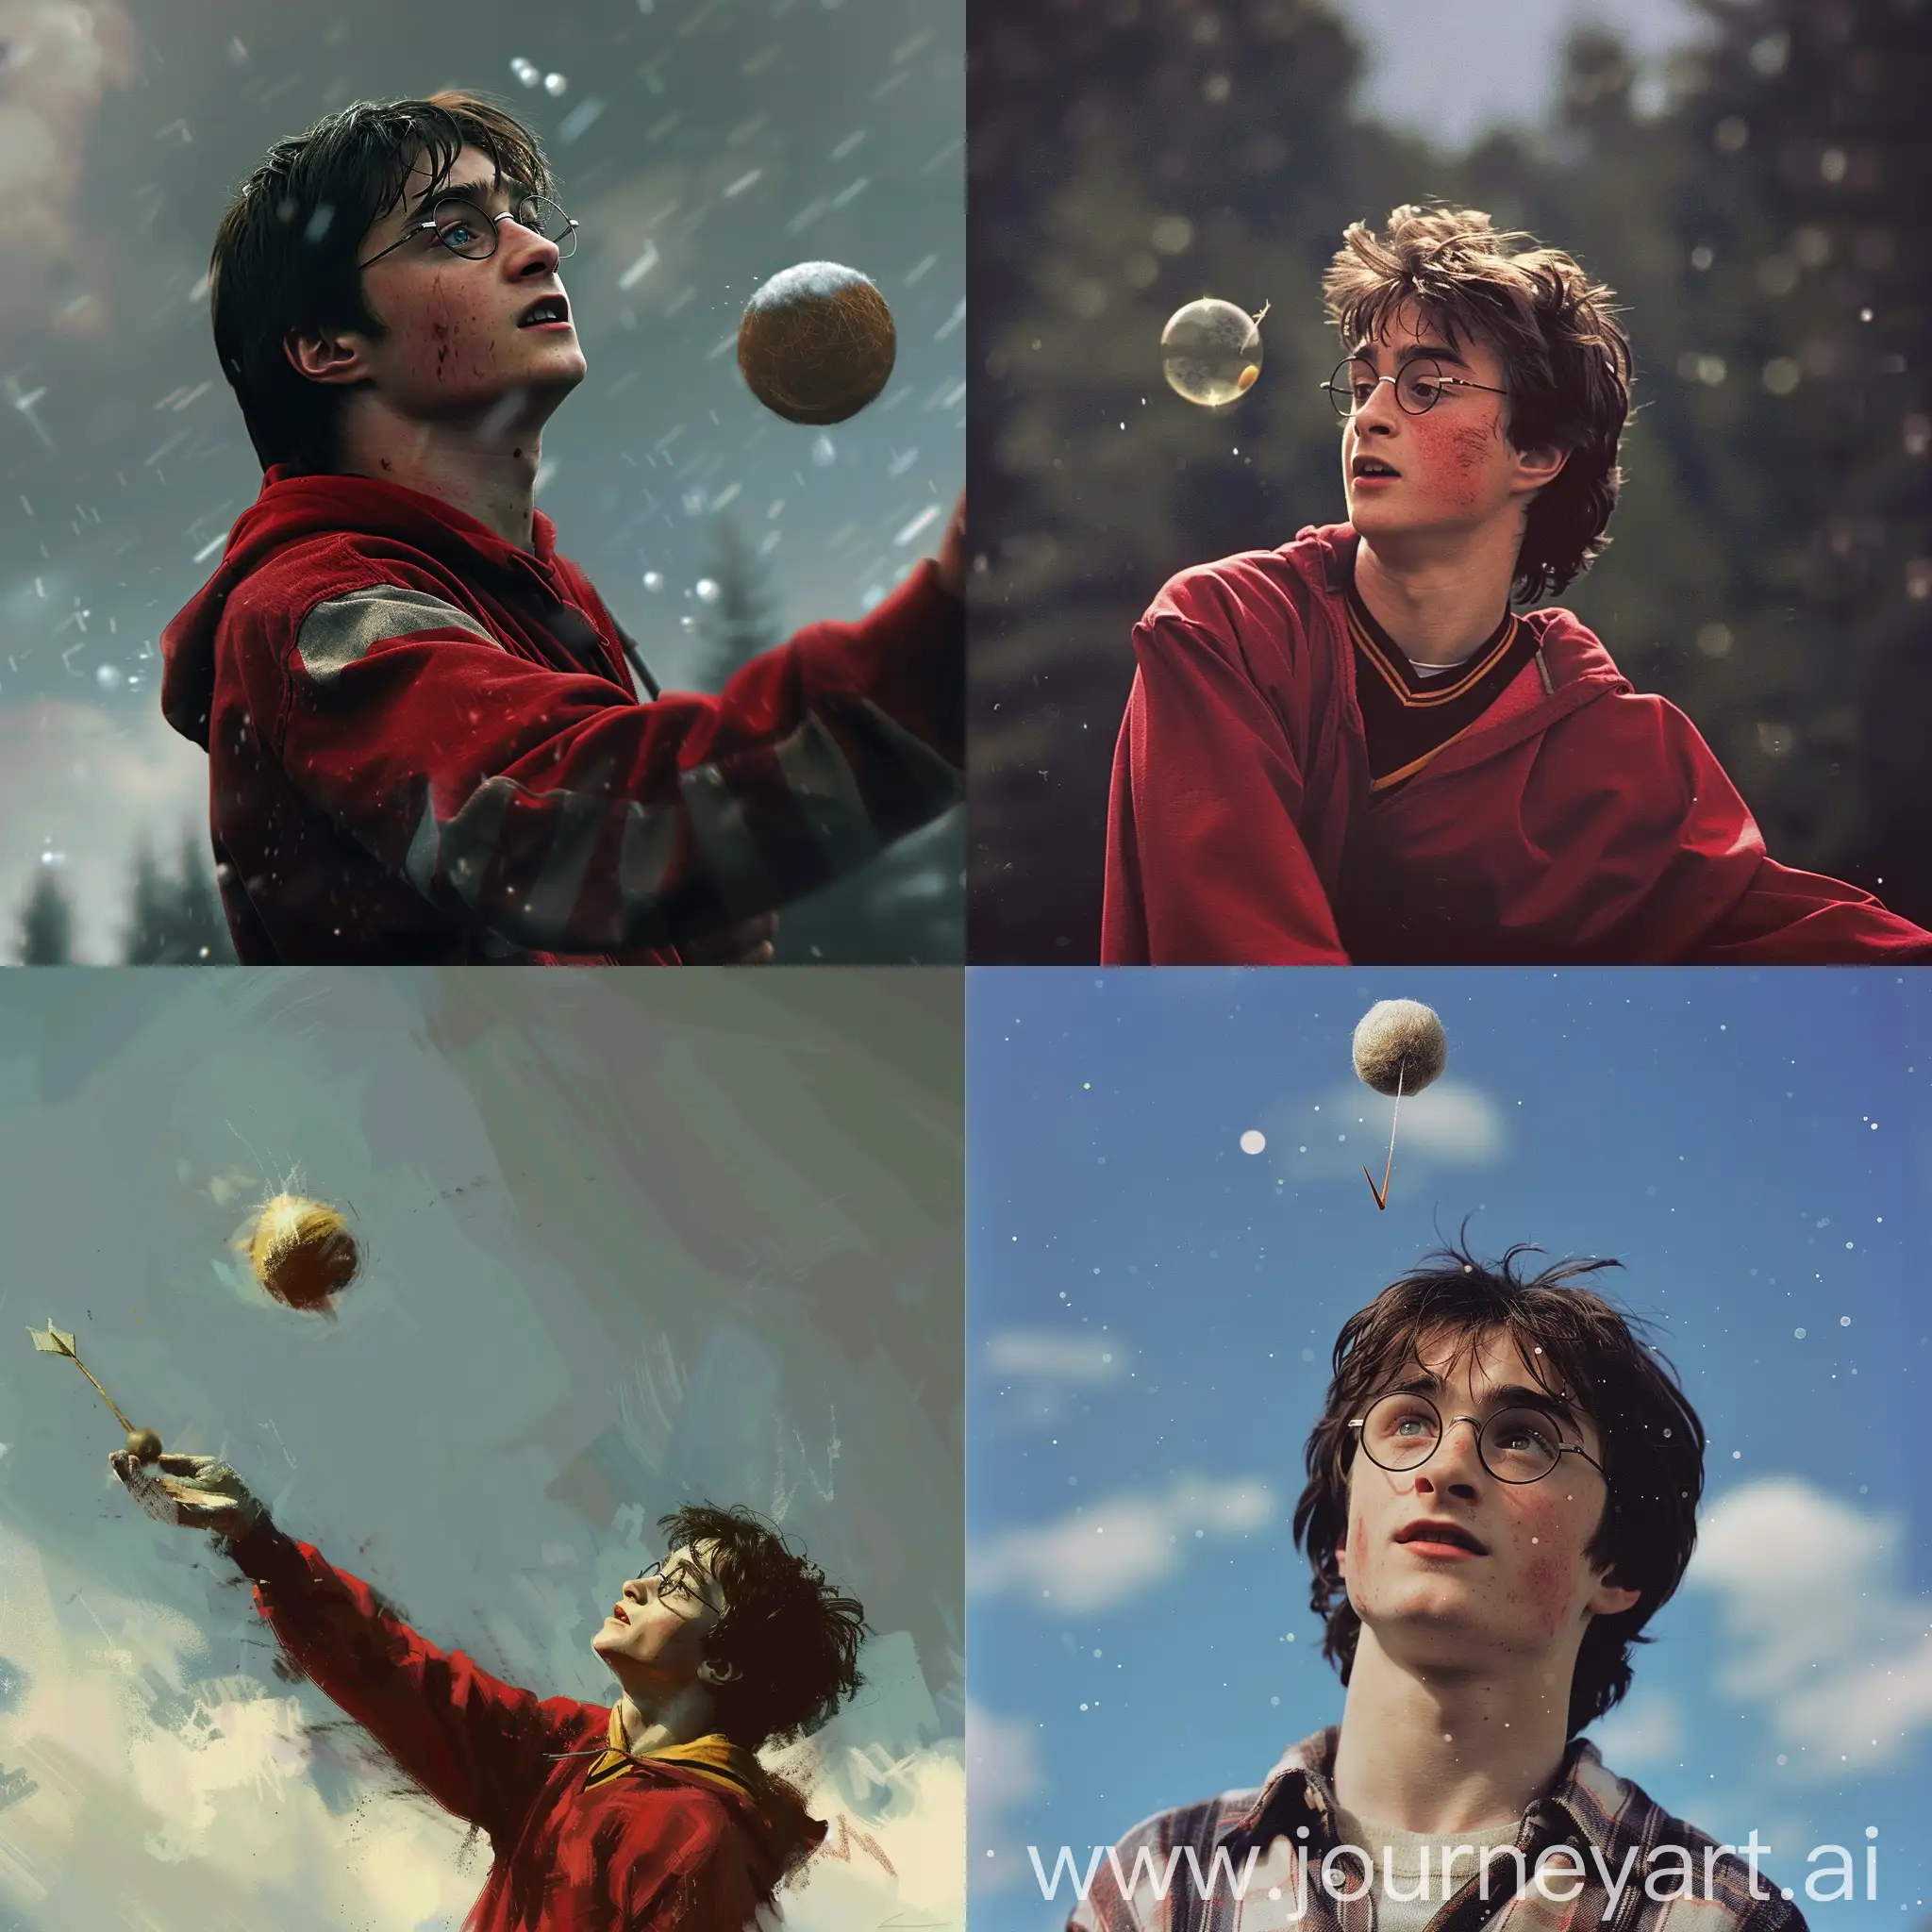 Harry potter, character, quidditch, catch the snitch